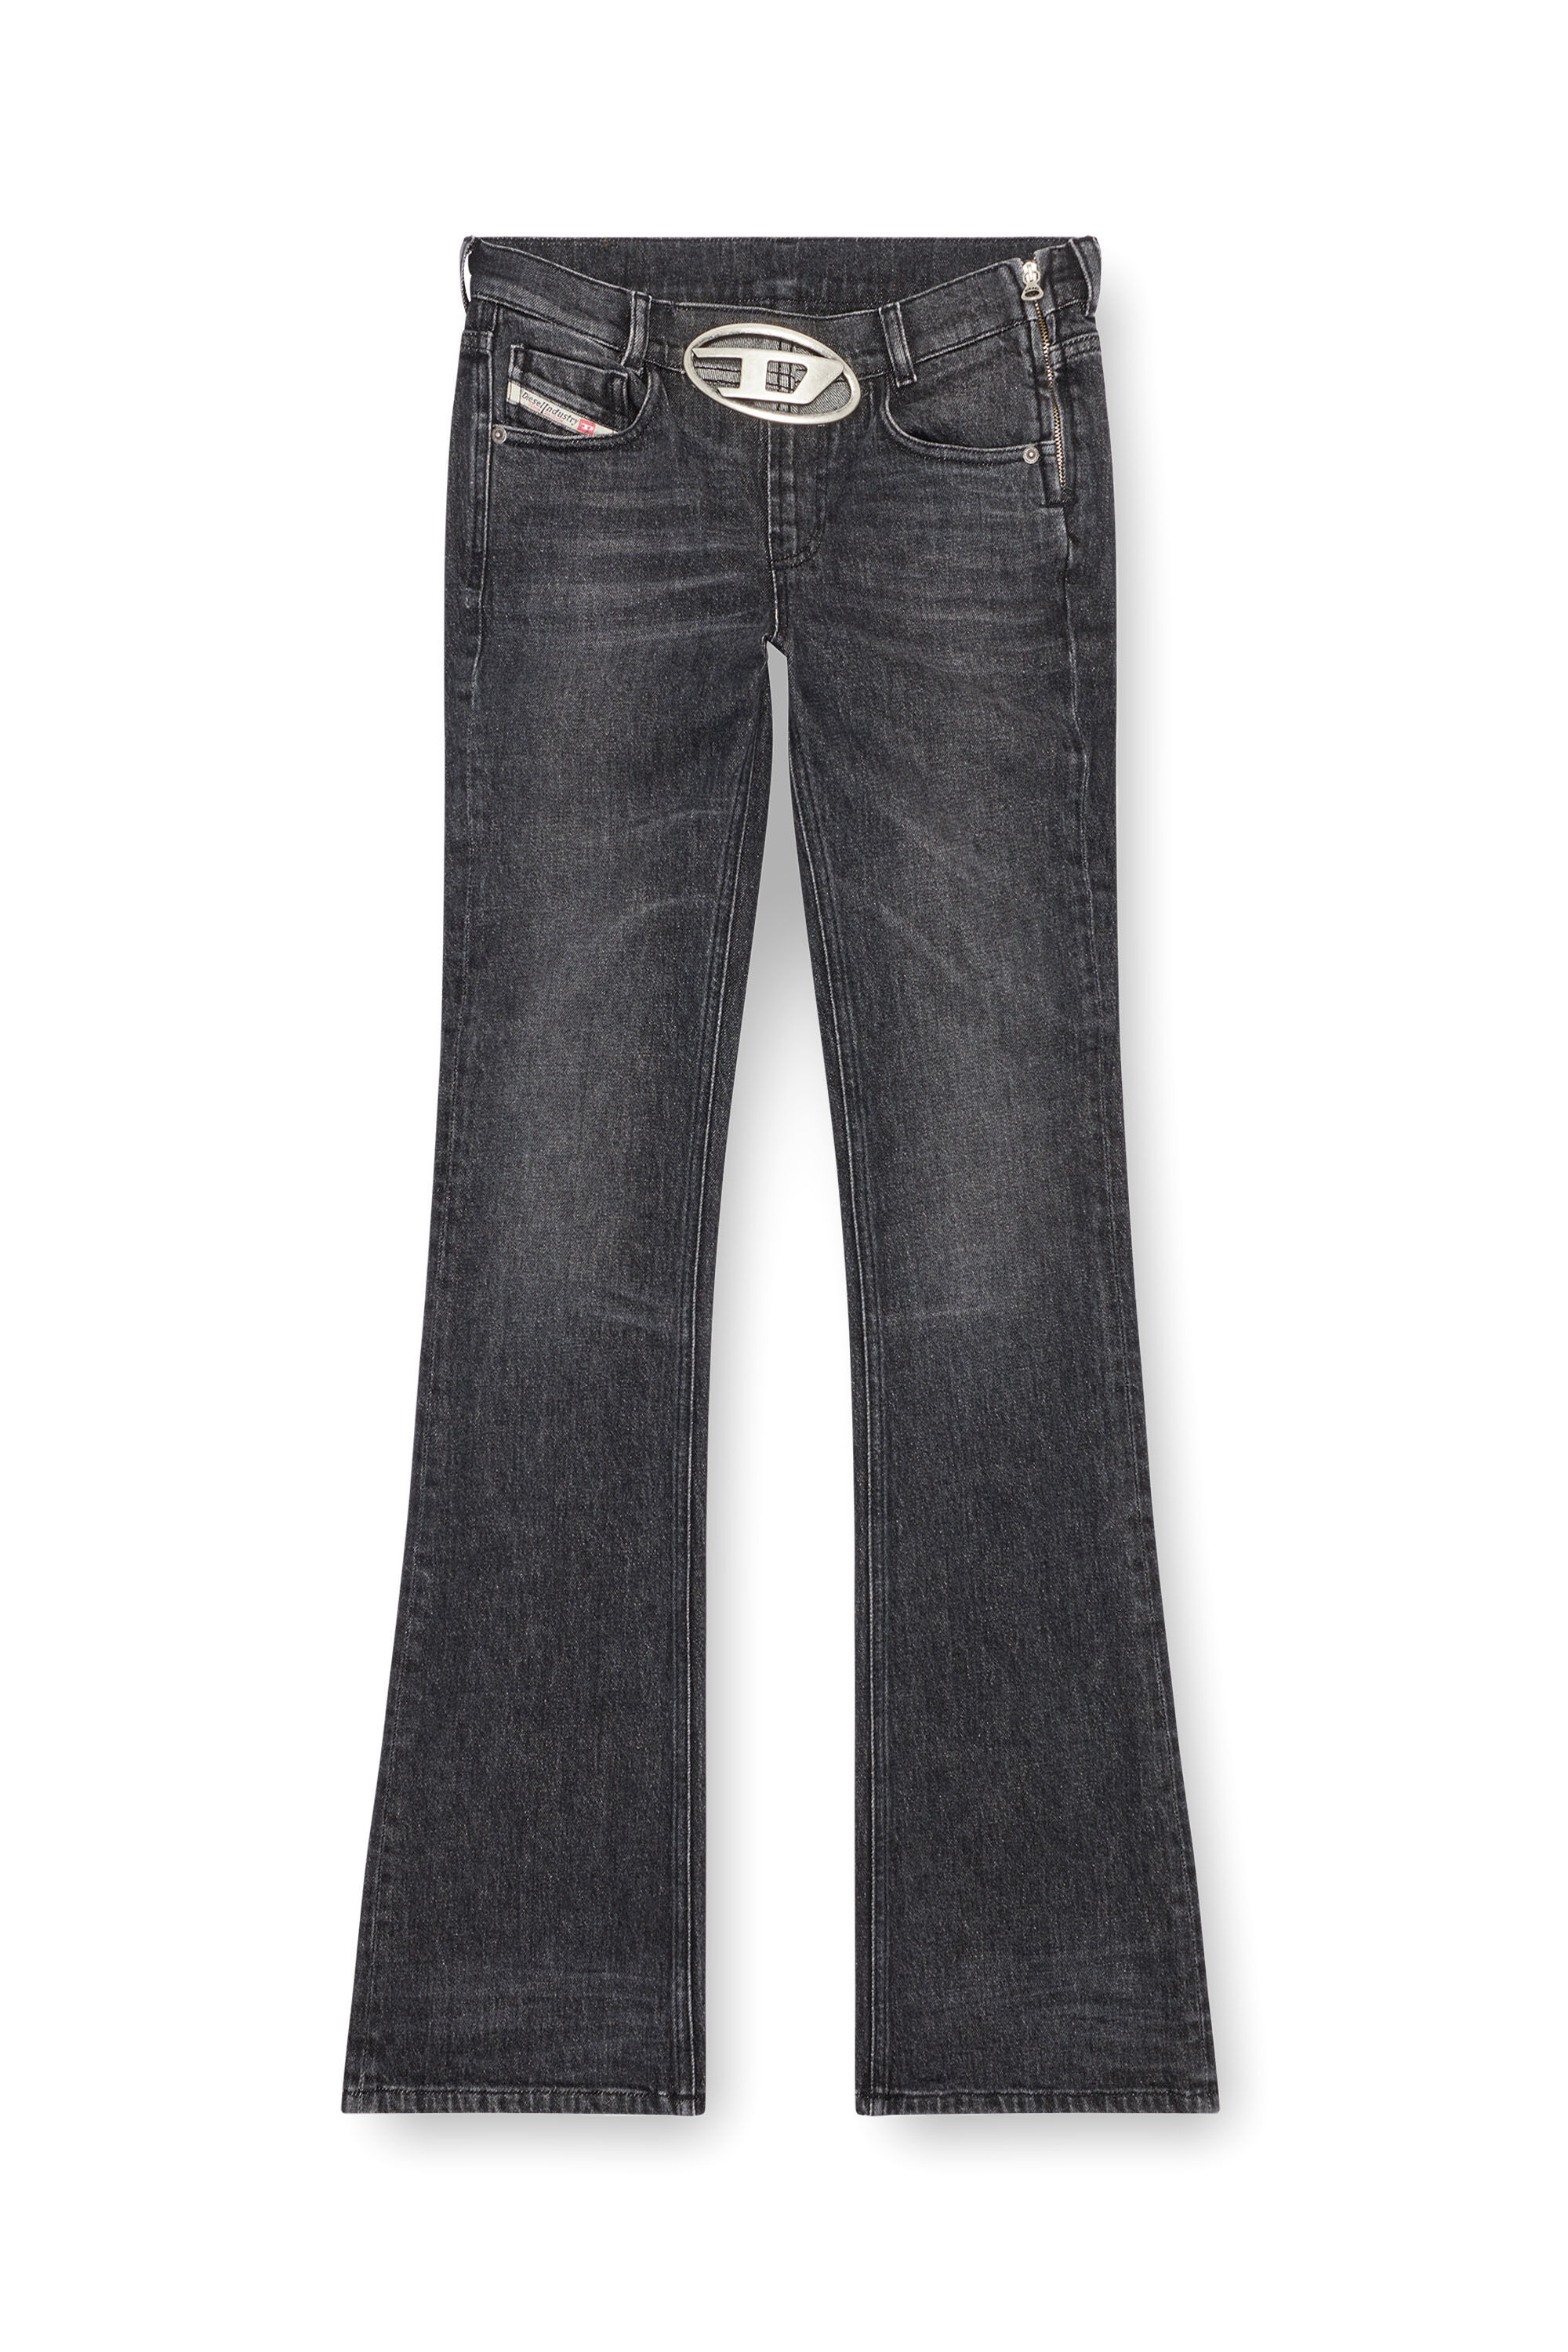 Diesel - Bootcut and Flare Jeans 1969 D-Ebbey 0CKAH, Mujer Bootcut y Flare Jeans - 1969 D-Ebbey in Negro - Image 2